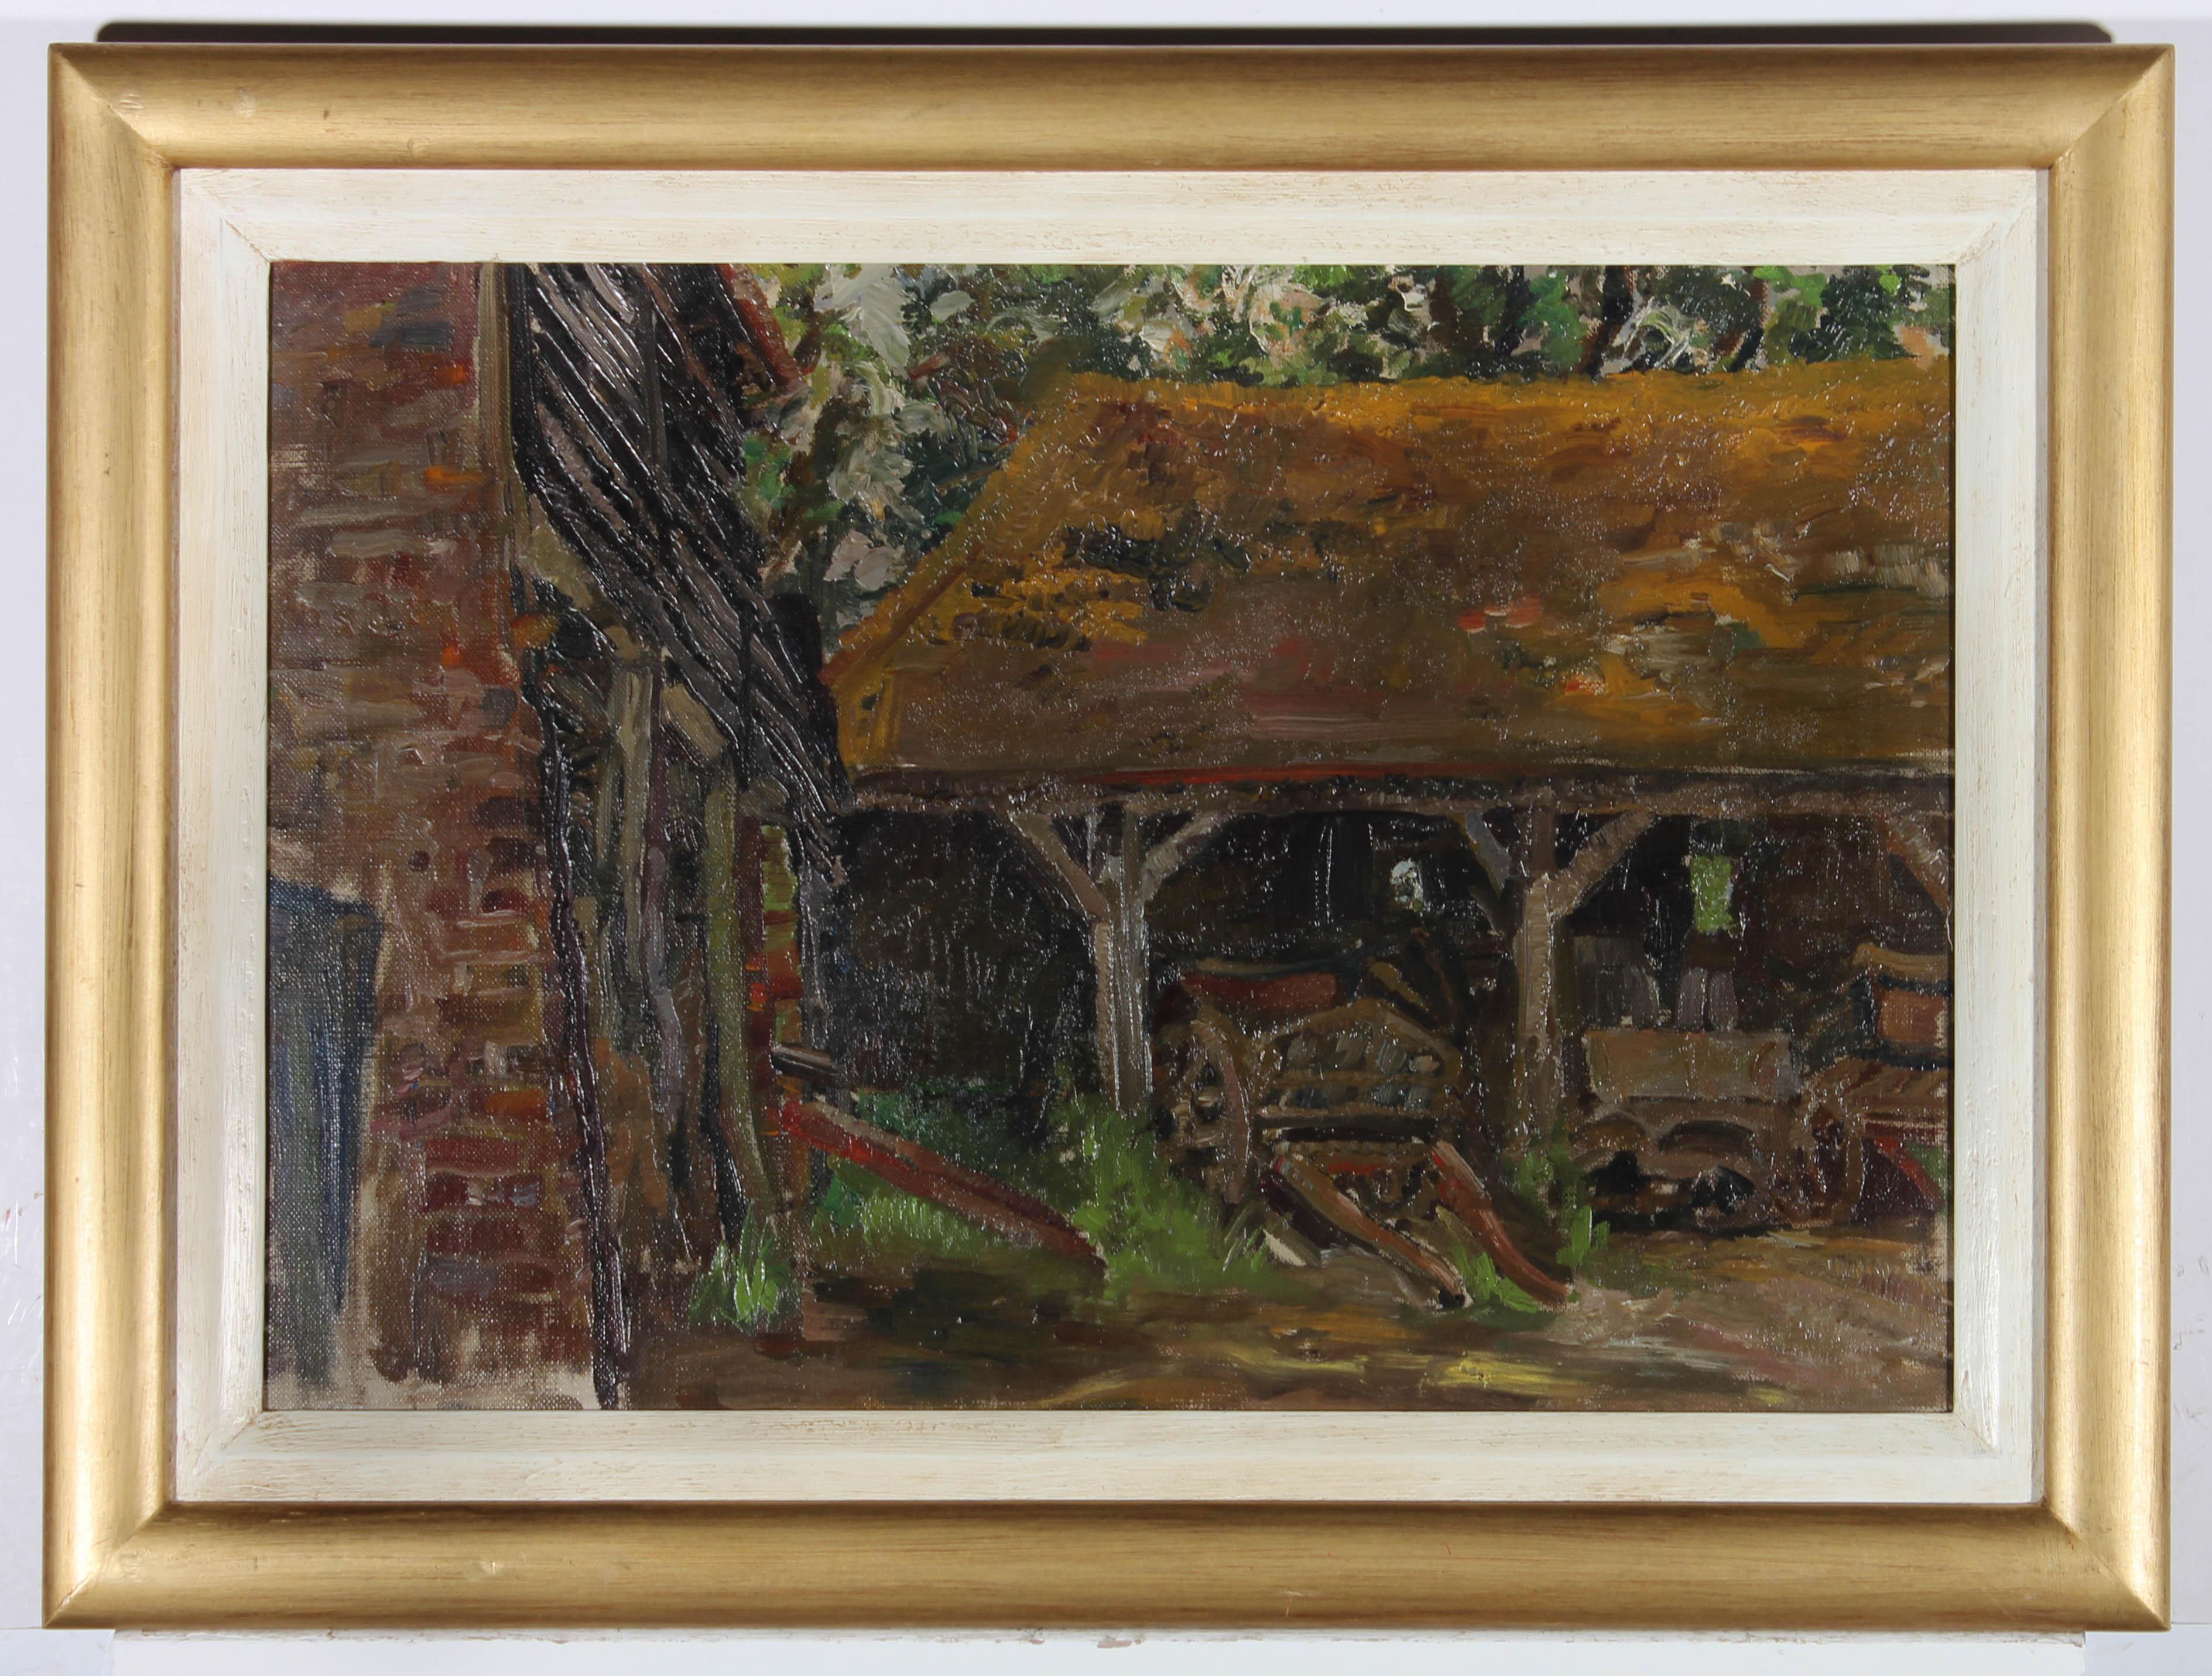 A fine Mid Century scene in textured oil, showing a rustic barn filled with machinery with farm outbuildings on the left. The painting is unsigned and presented in a simple gilt frame with white inner window. On canvas.

